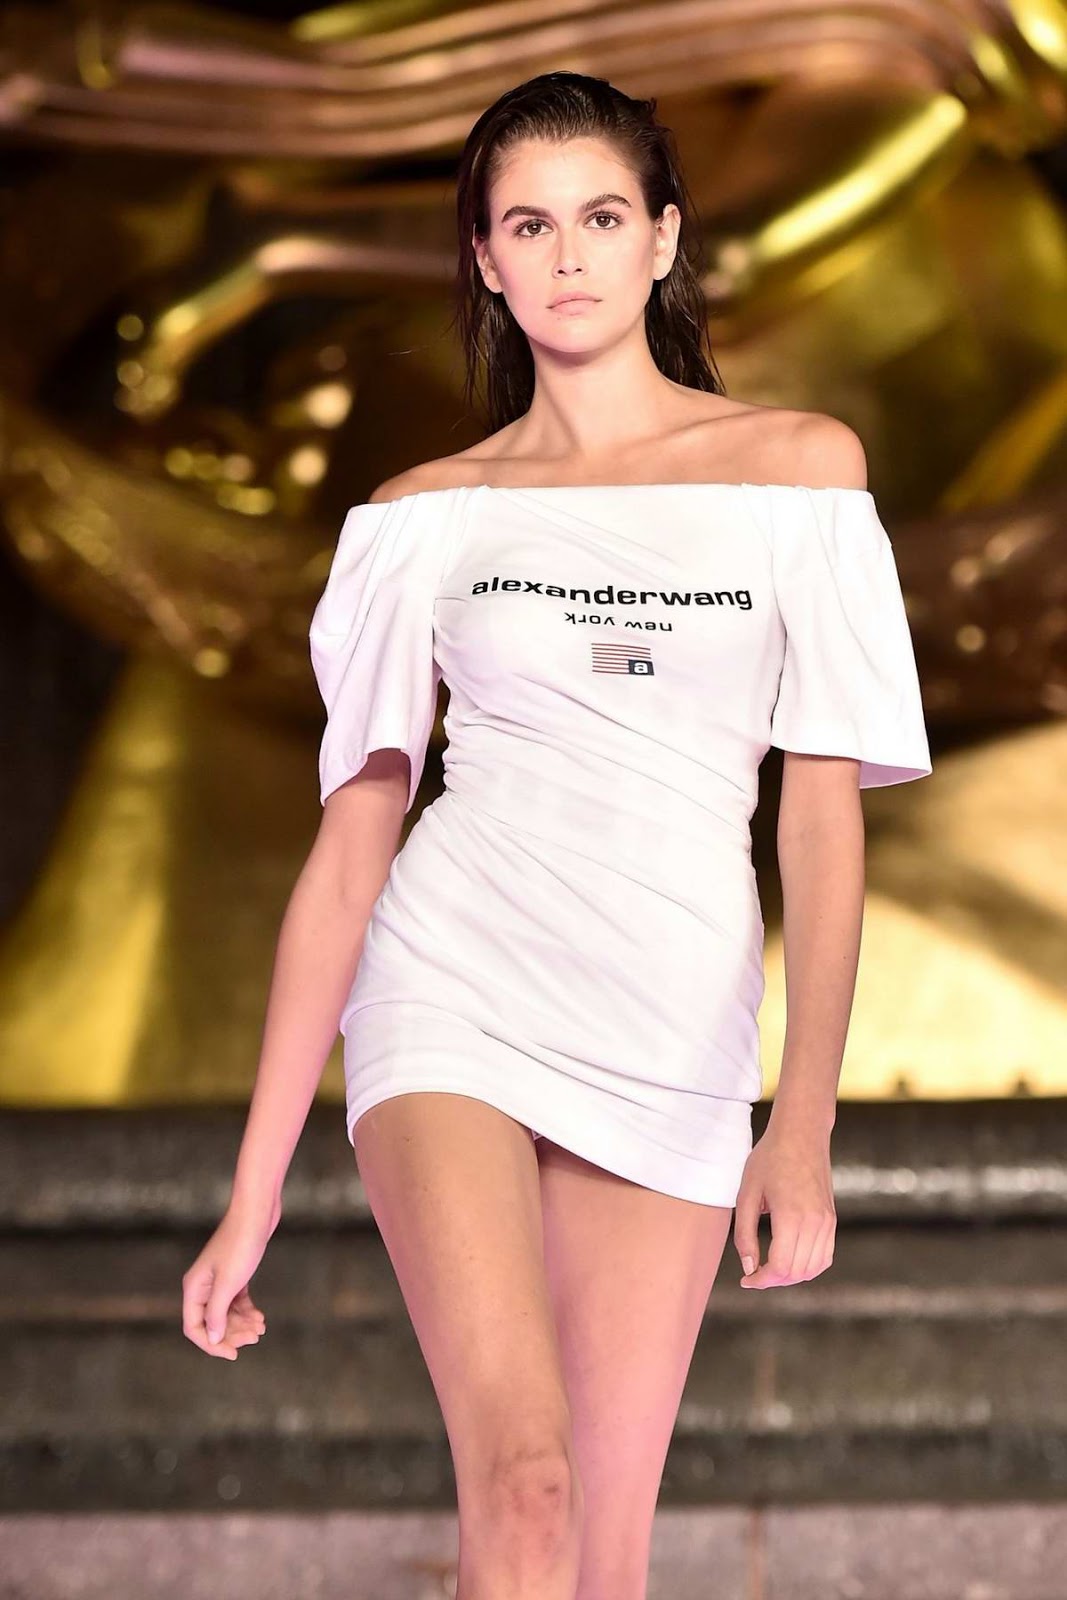 Kaia Gerber walks the runway during the Alexander Wang Collection 1 Fashion Show at Rockefeller Center in New York City